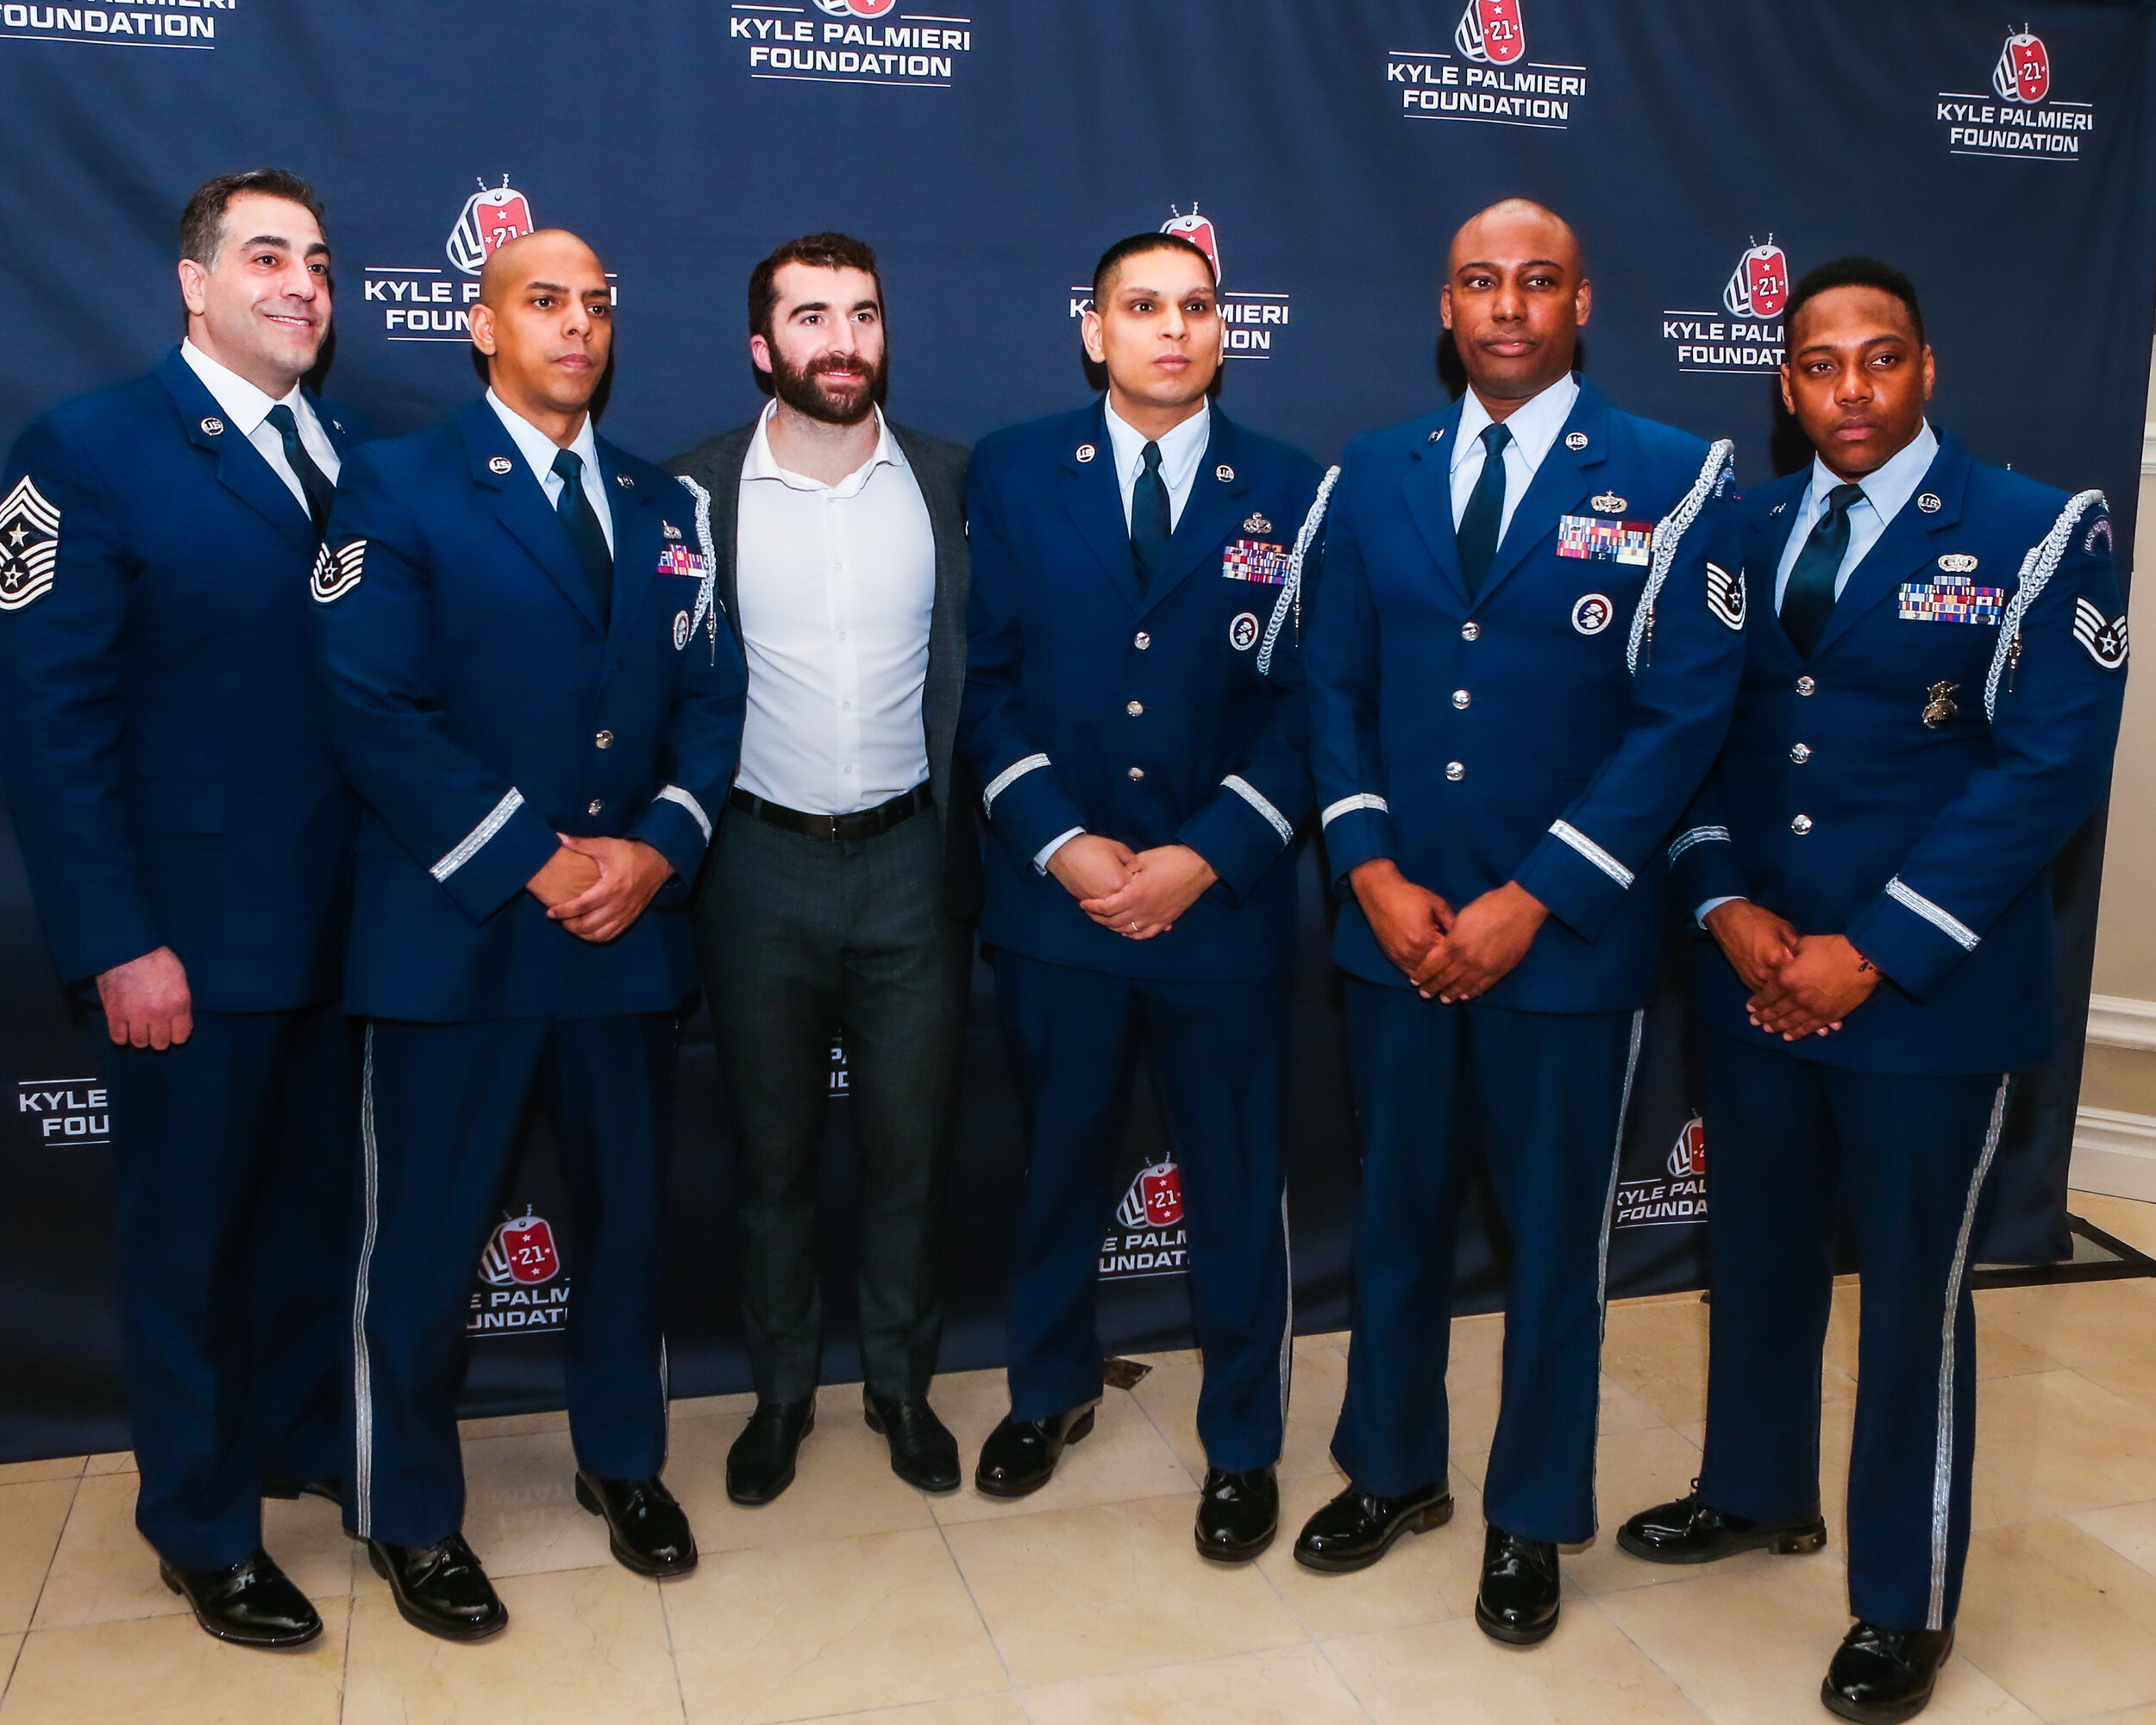 Kyle Palmieri Foundation grows with inaugural military ball